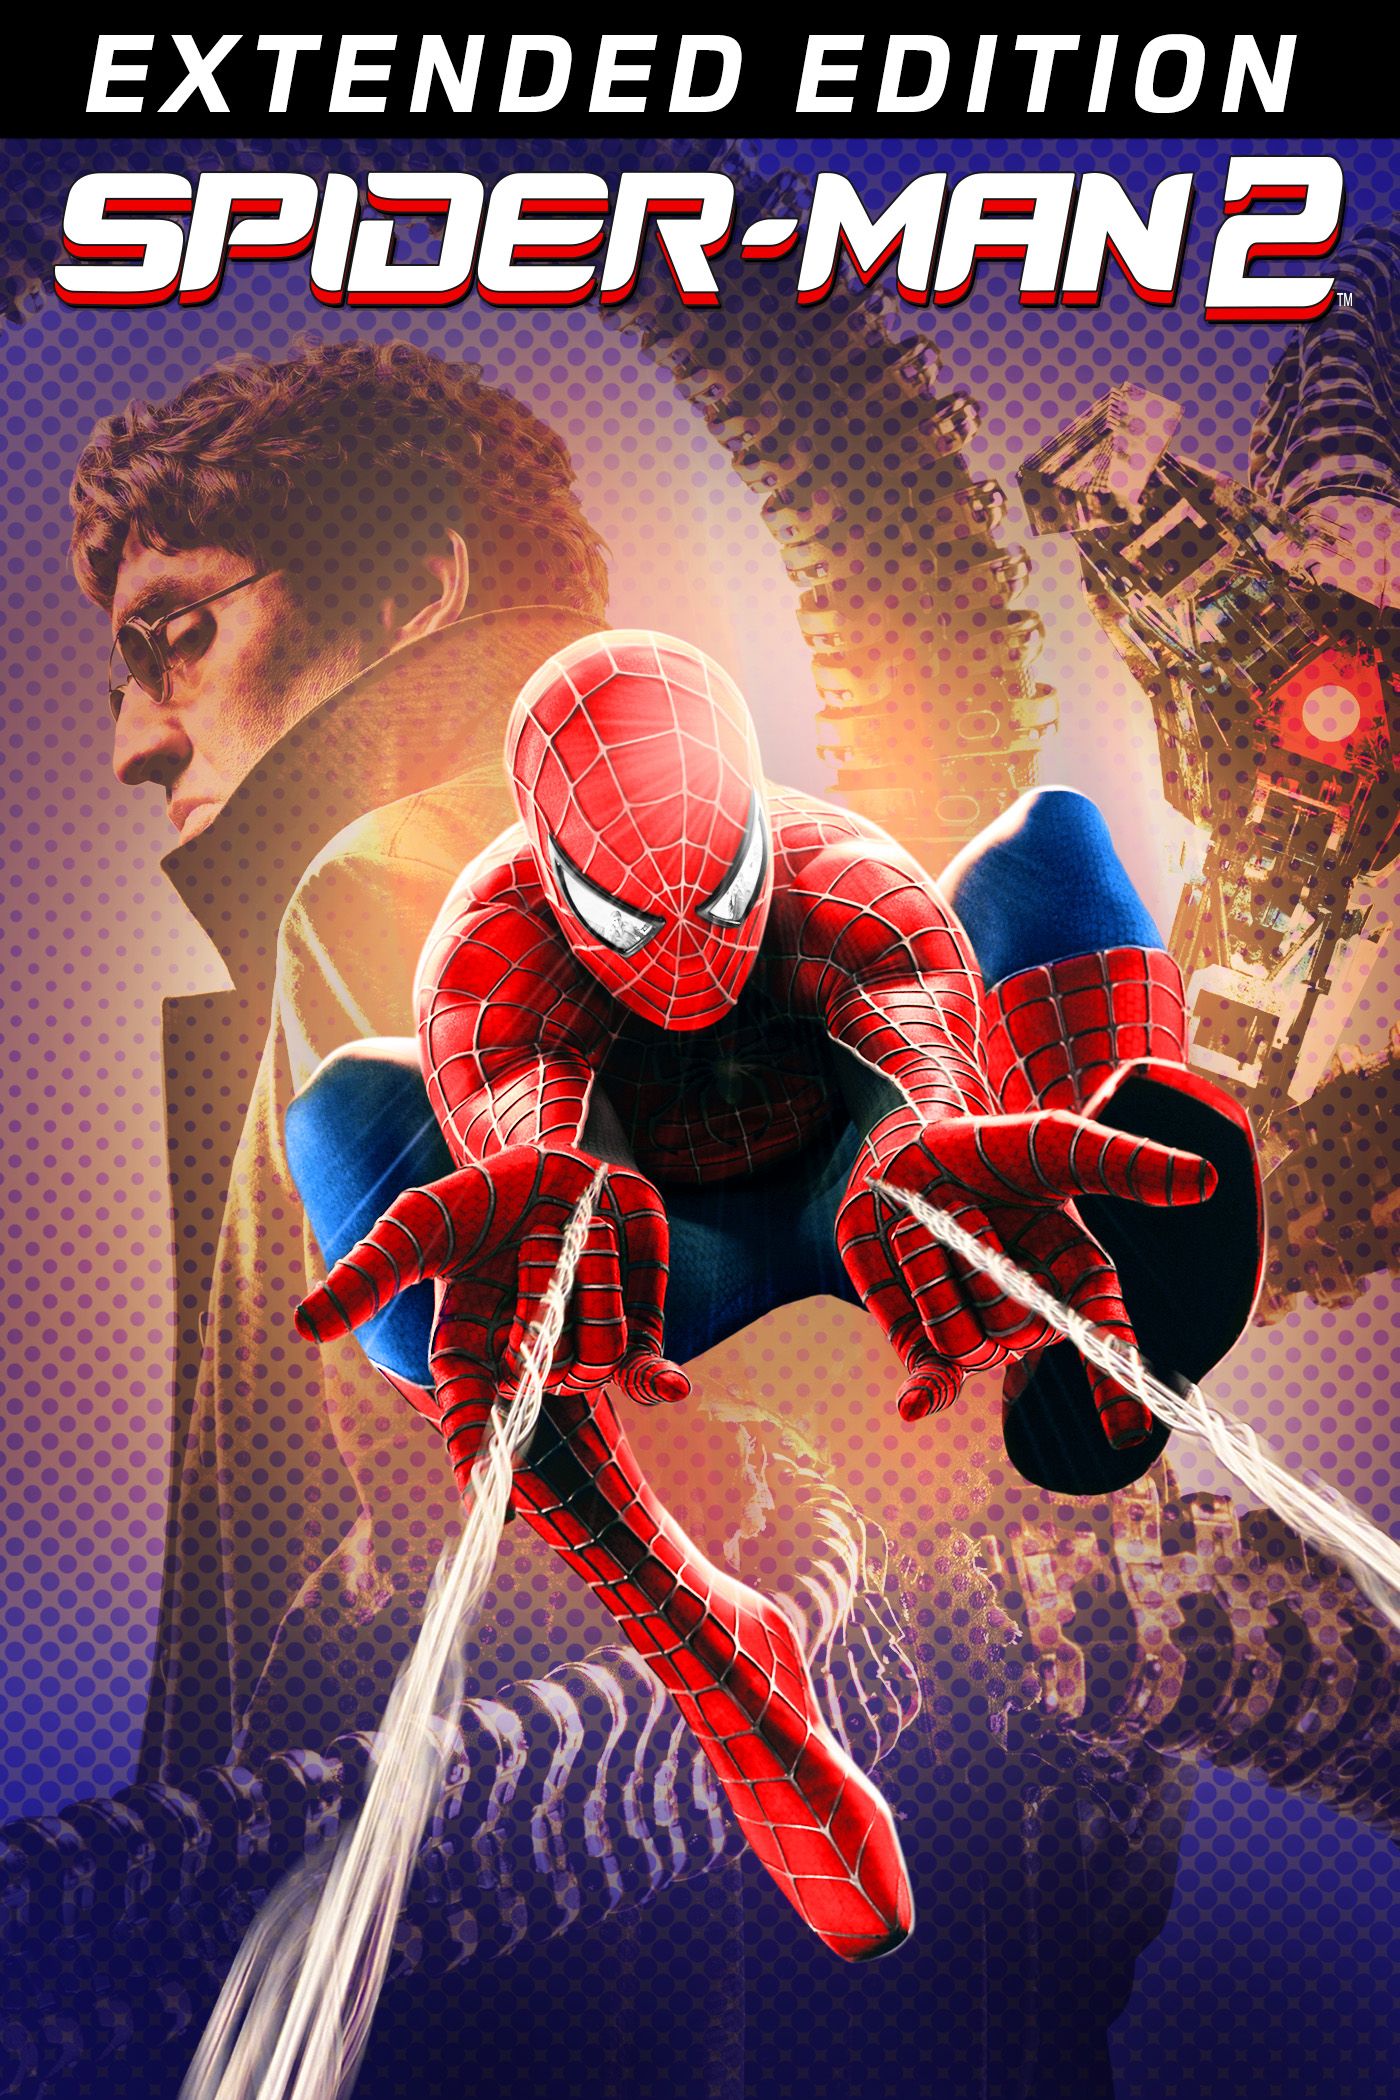 Spiderman 2 movie poster Tobey Maguire poster 11 x 17 (e) Spiderman poster